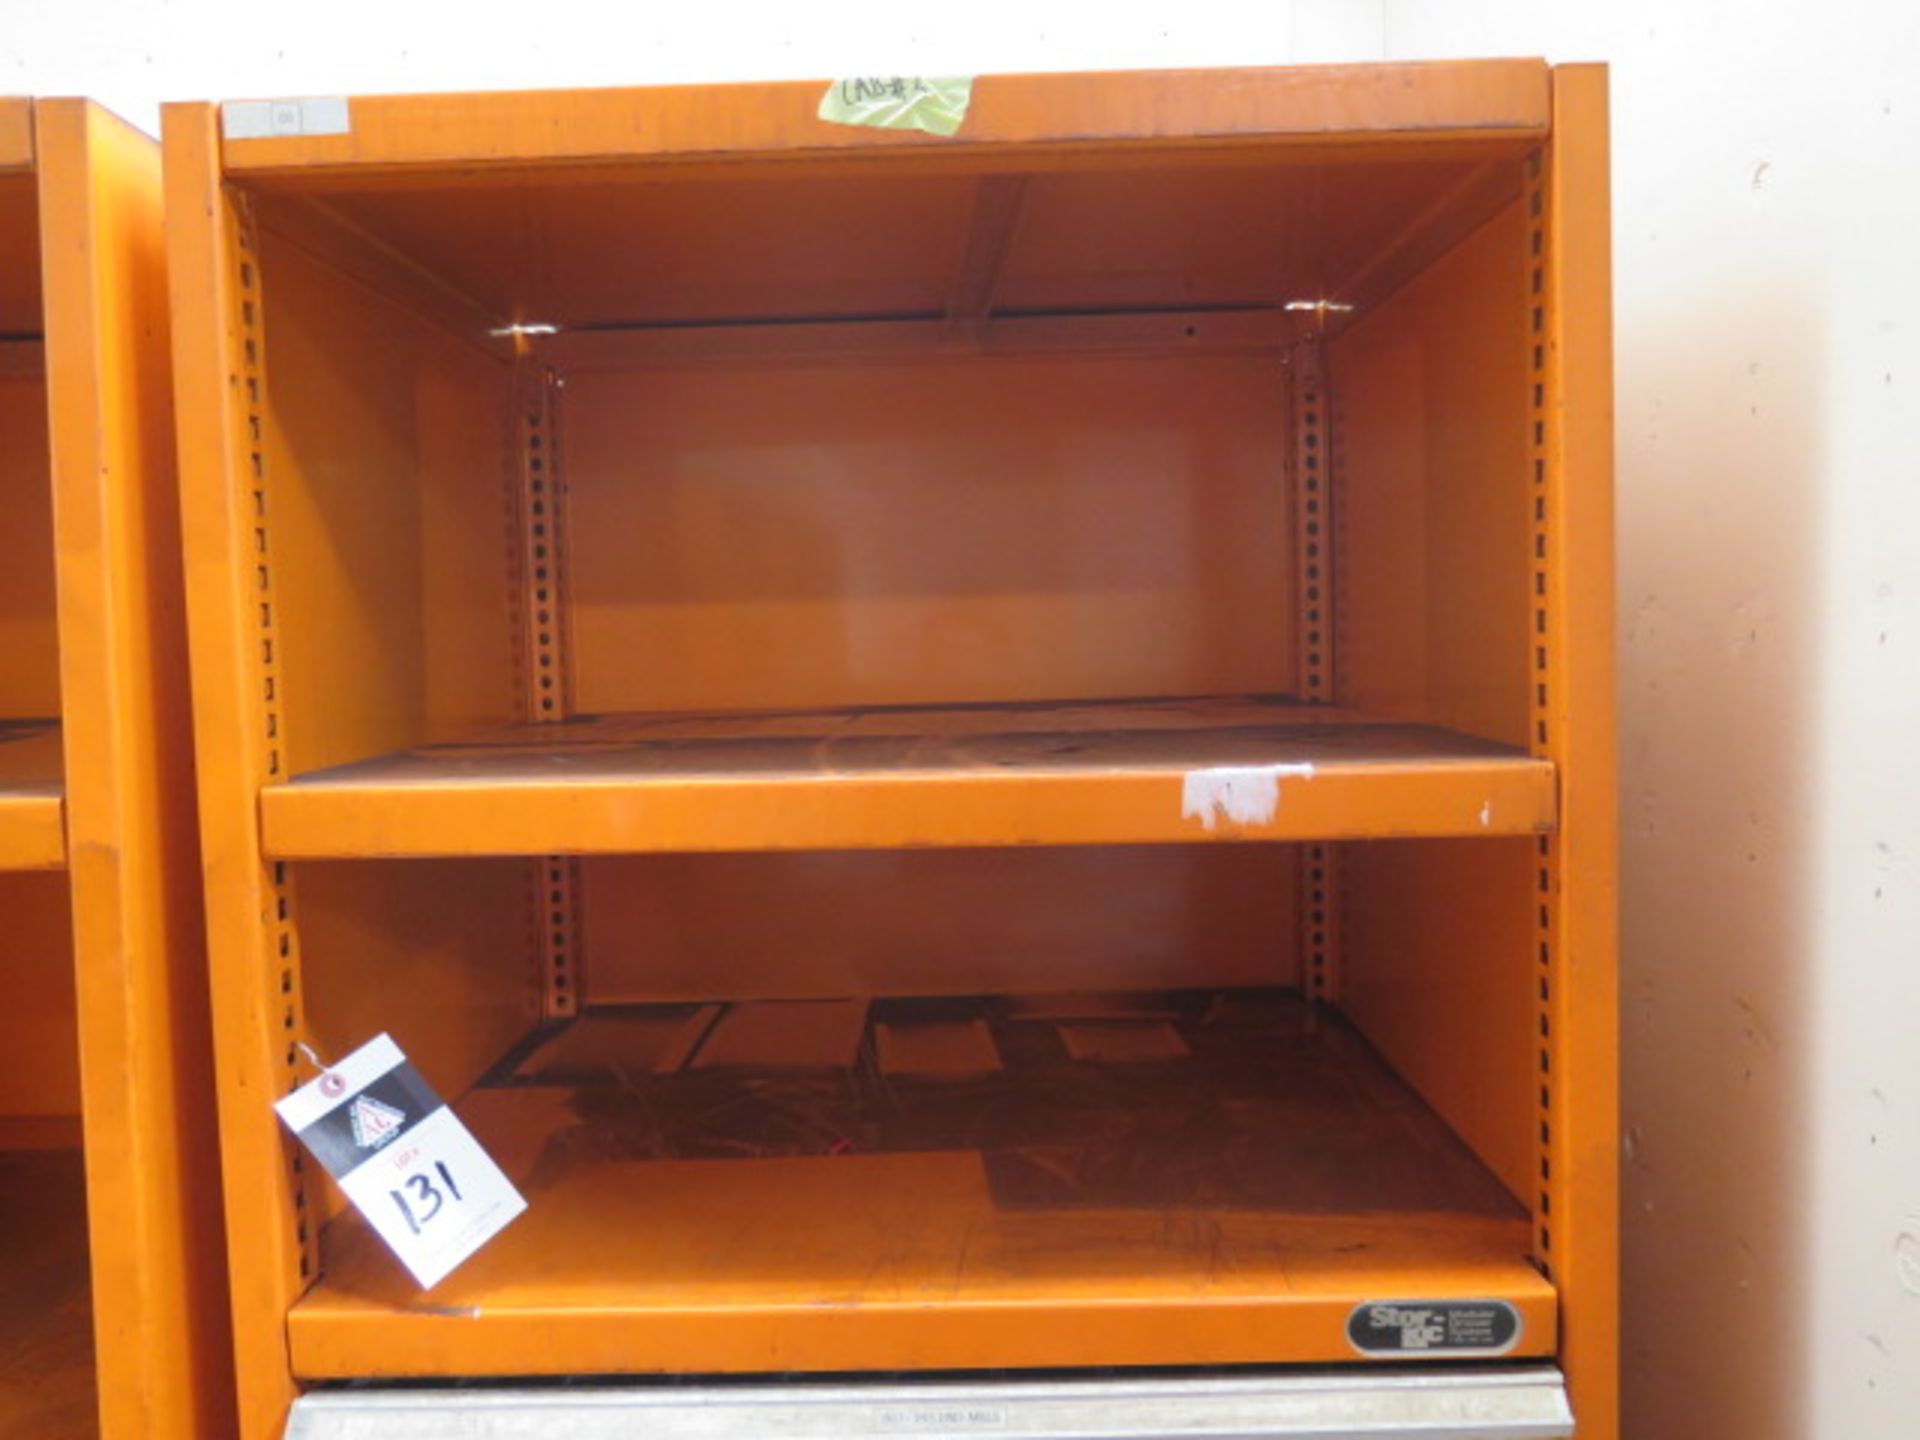 Stor-Loc 7-Drawer Tooling Cabinet / Shelf Unit (SOLD AS-IS - NO WARRANTY) - Image 2 of 6